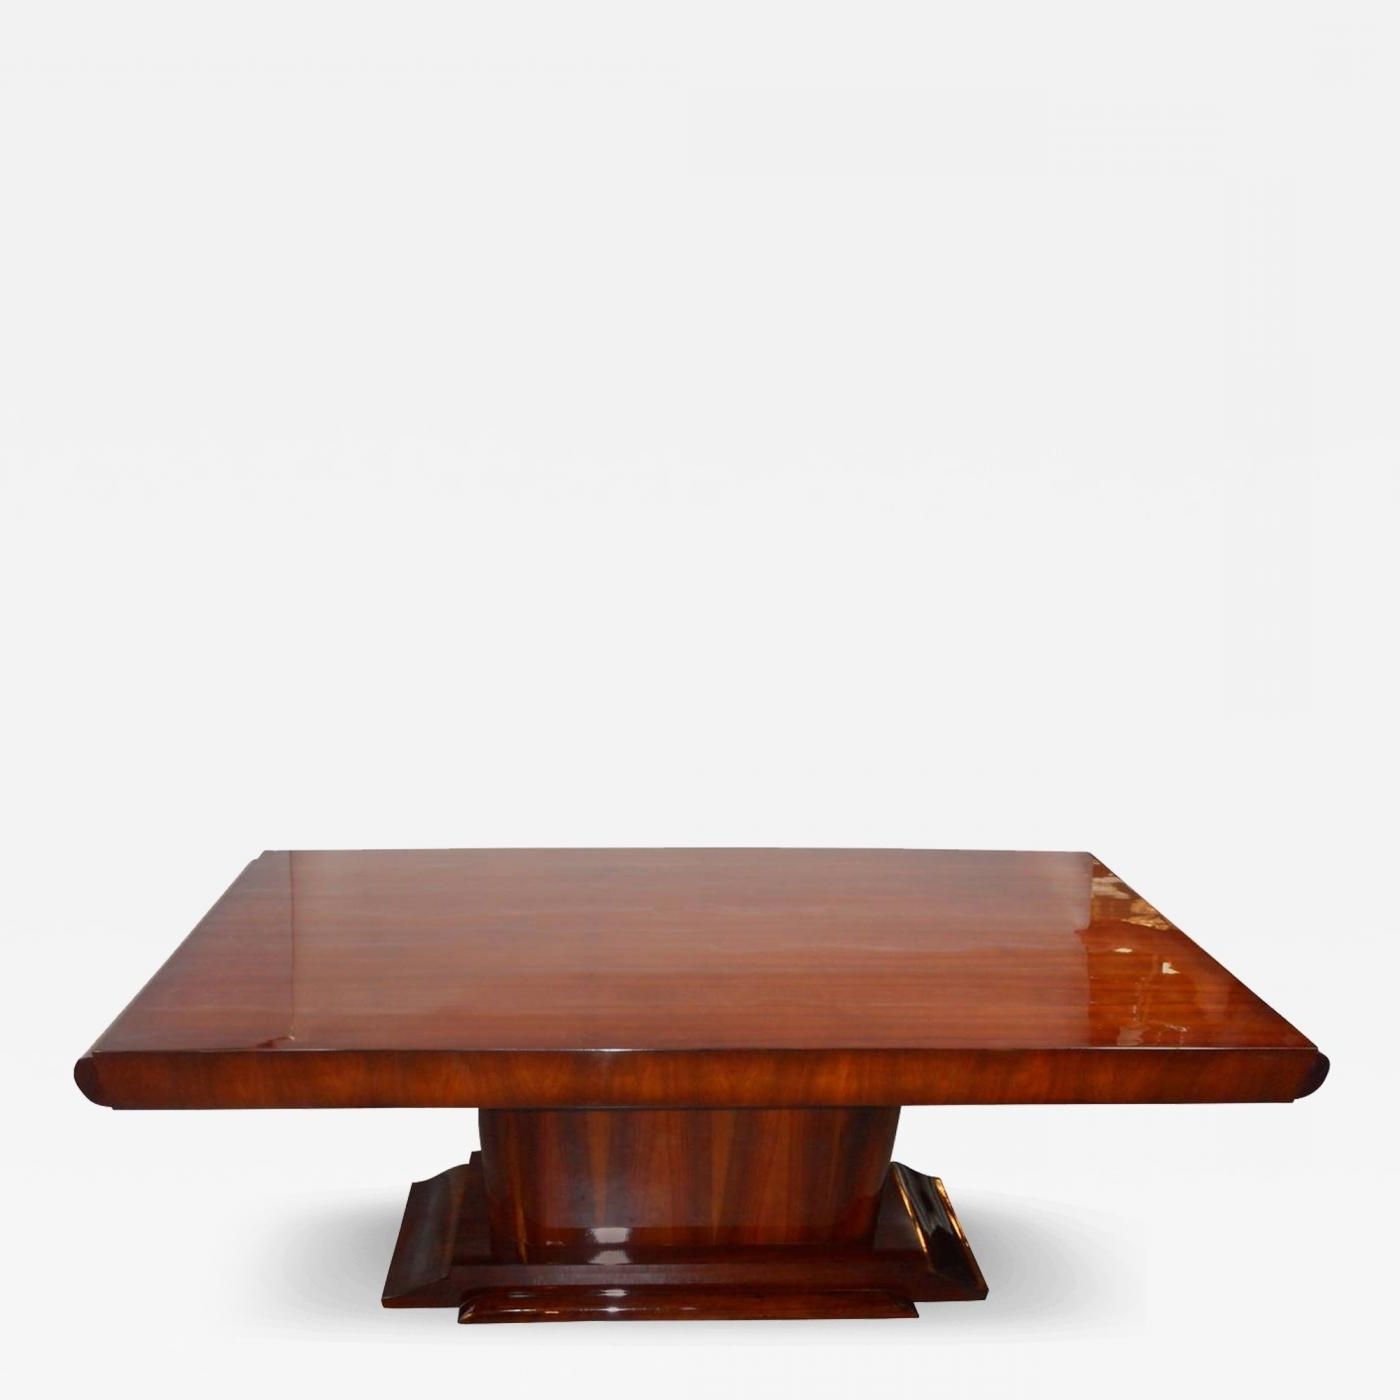 Leon Dining Tables Pertaining To Widely Used Léon Jallot – Dining Tableleon Jallot, C. 1920s (Photo 11 of 25)